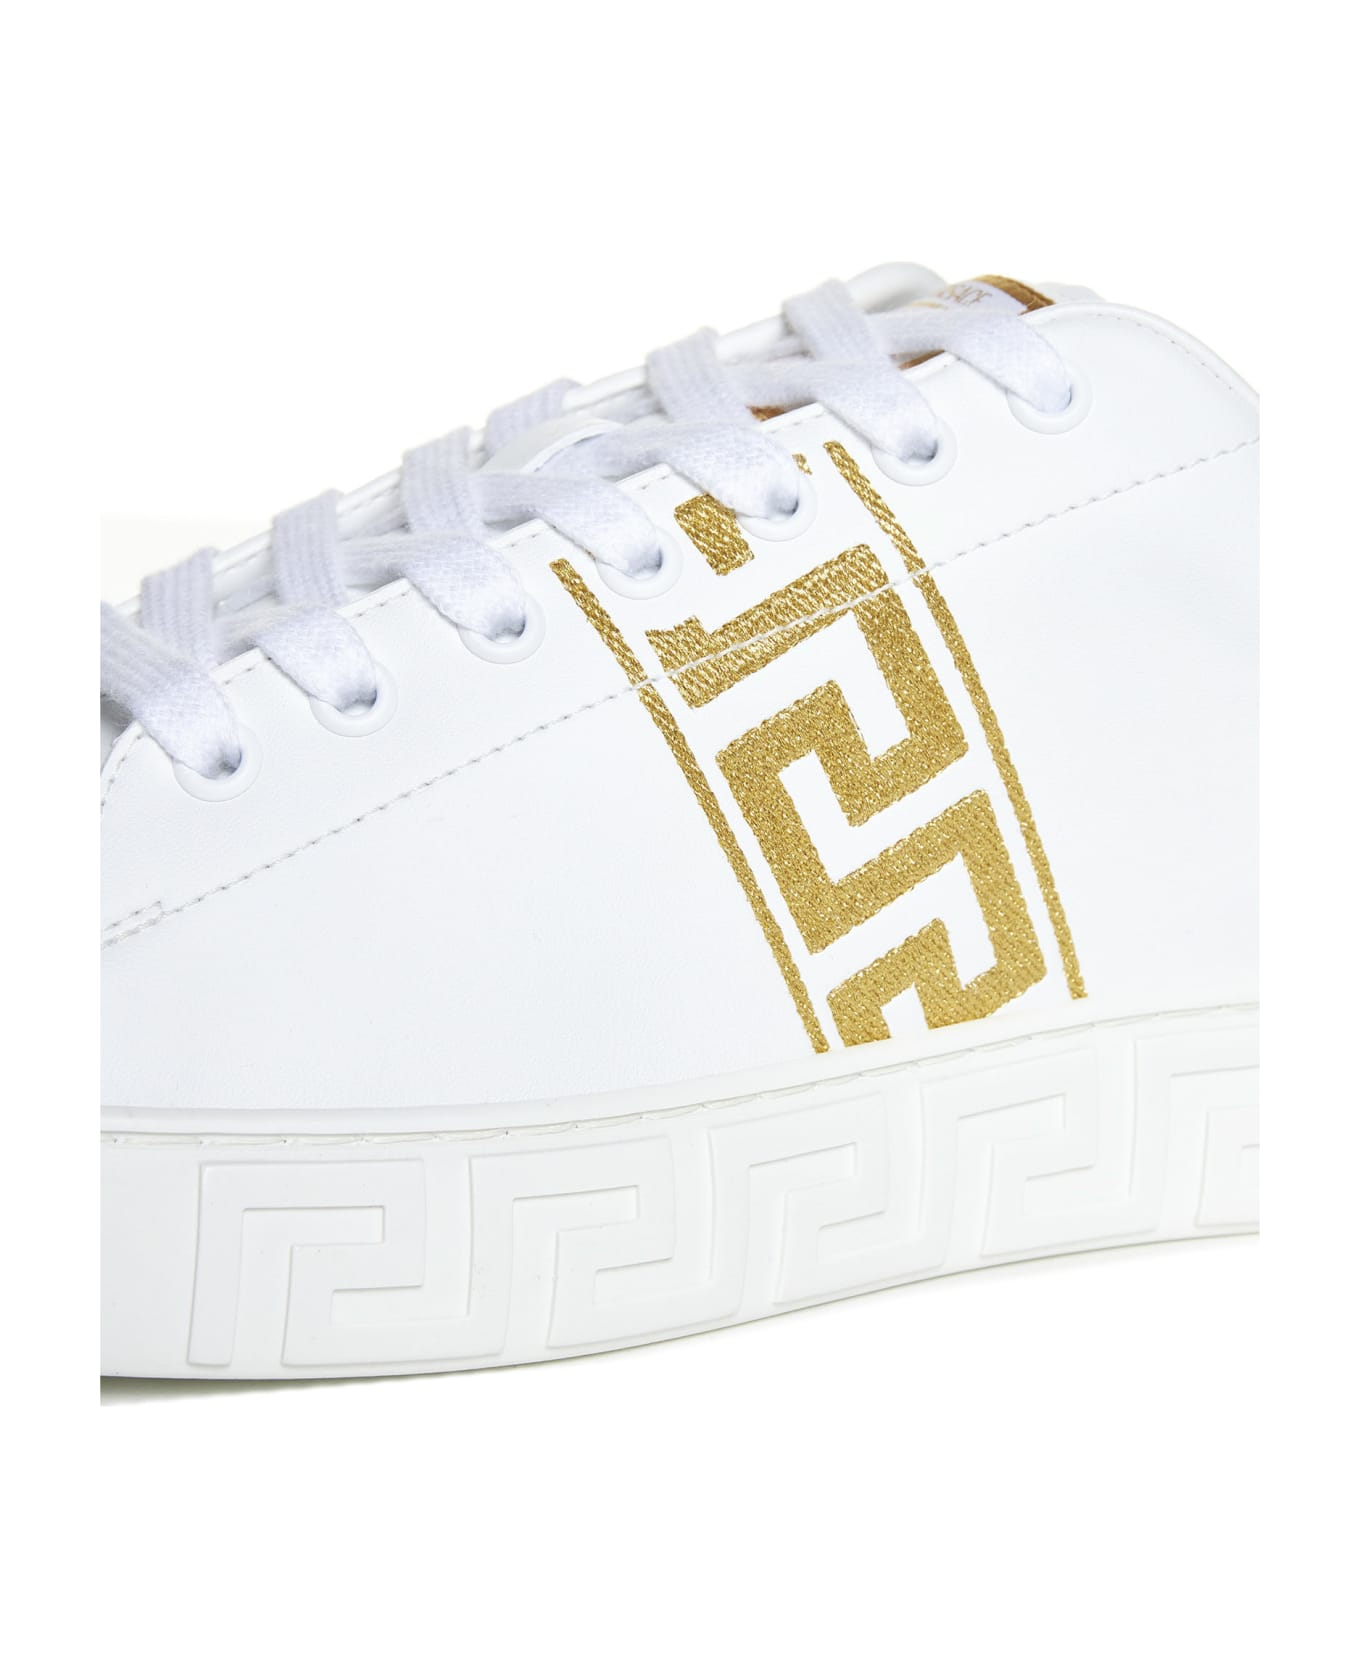 Versace Sneakers - White gold スニーカー